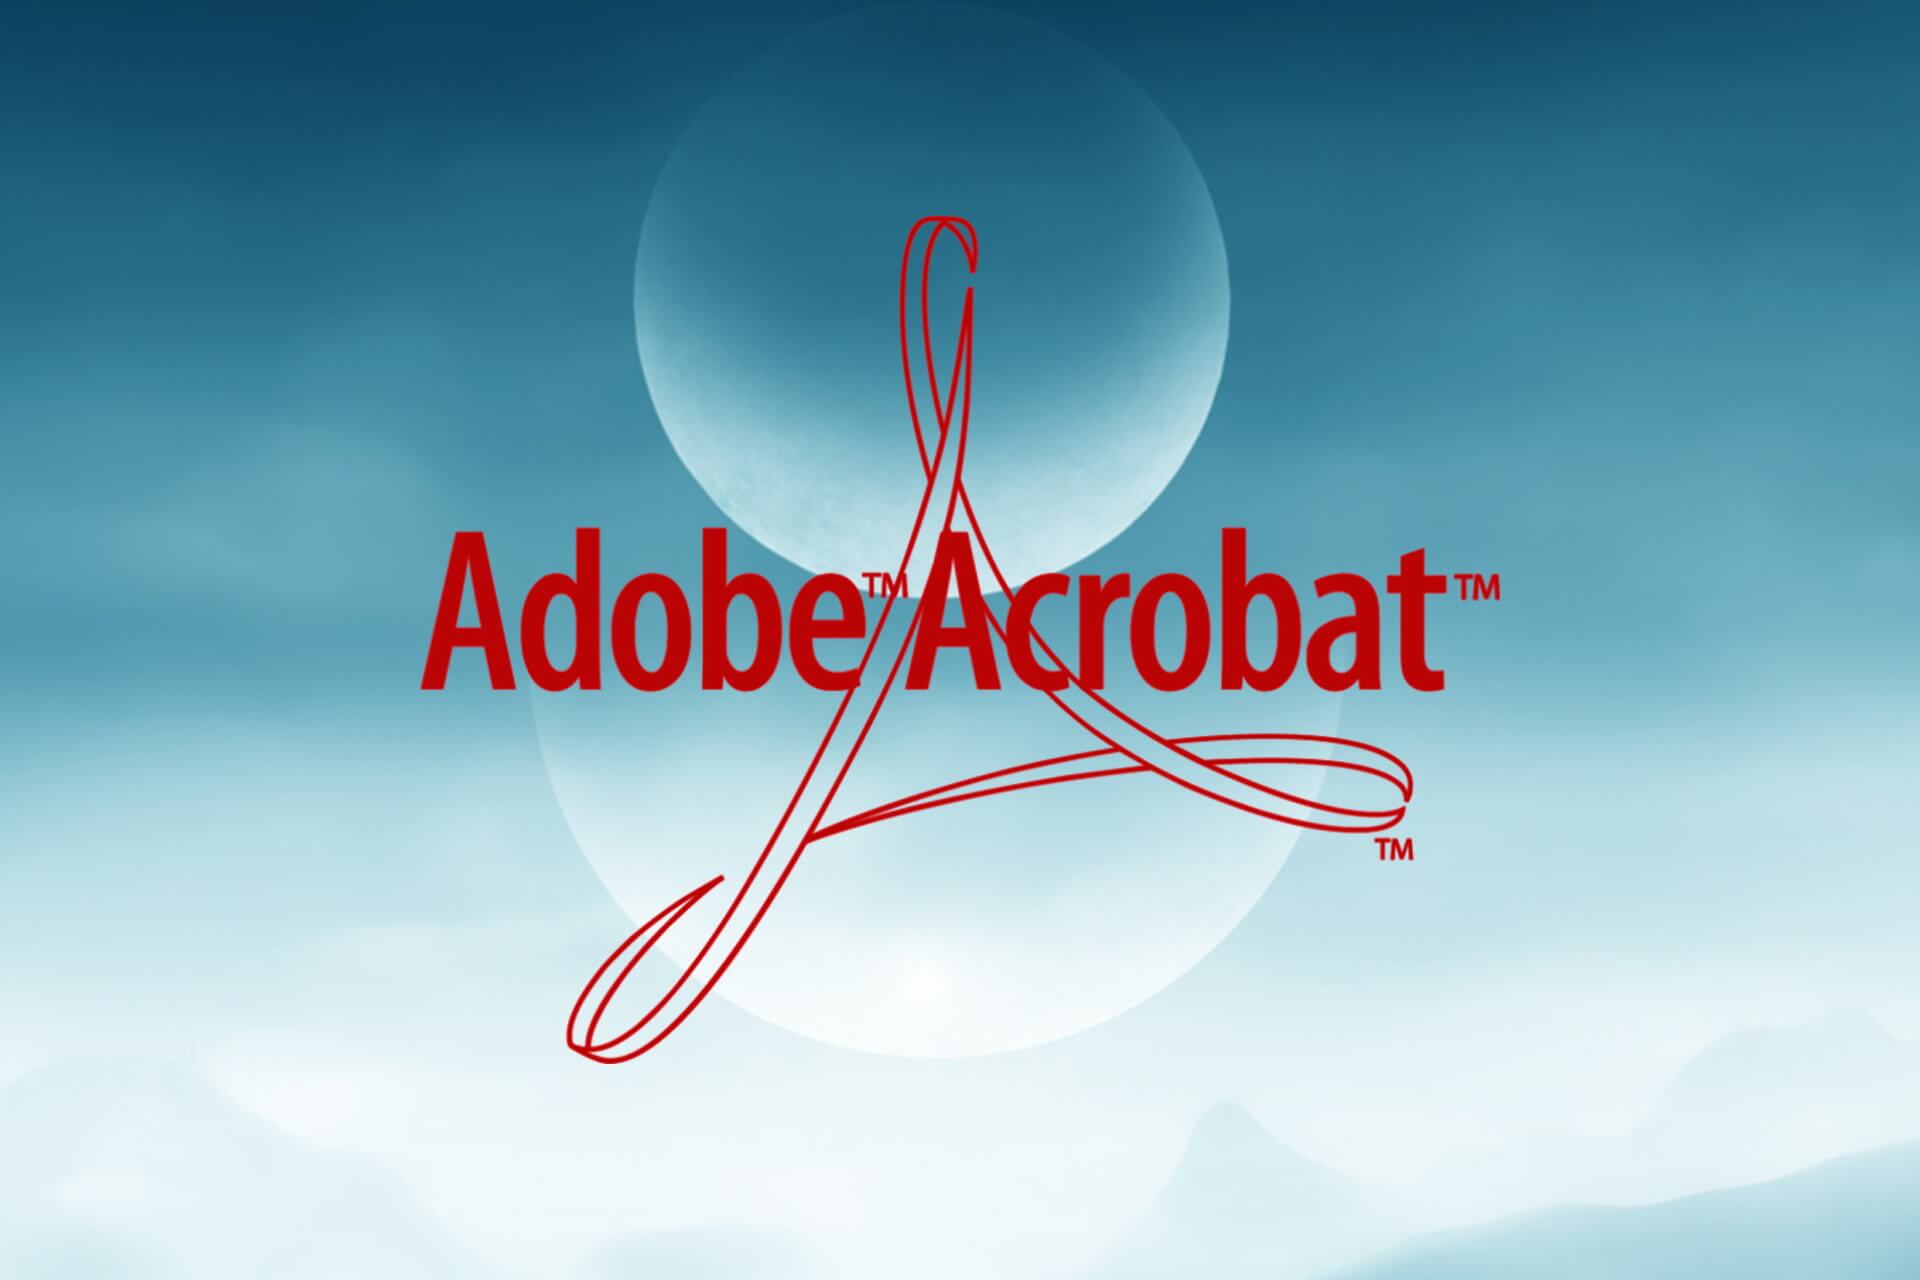 Fix This document restricts some Acrobat features